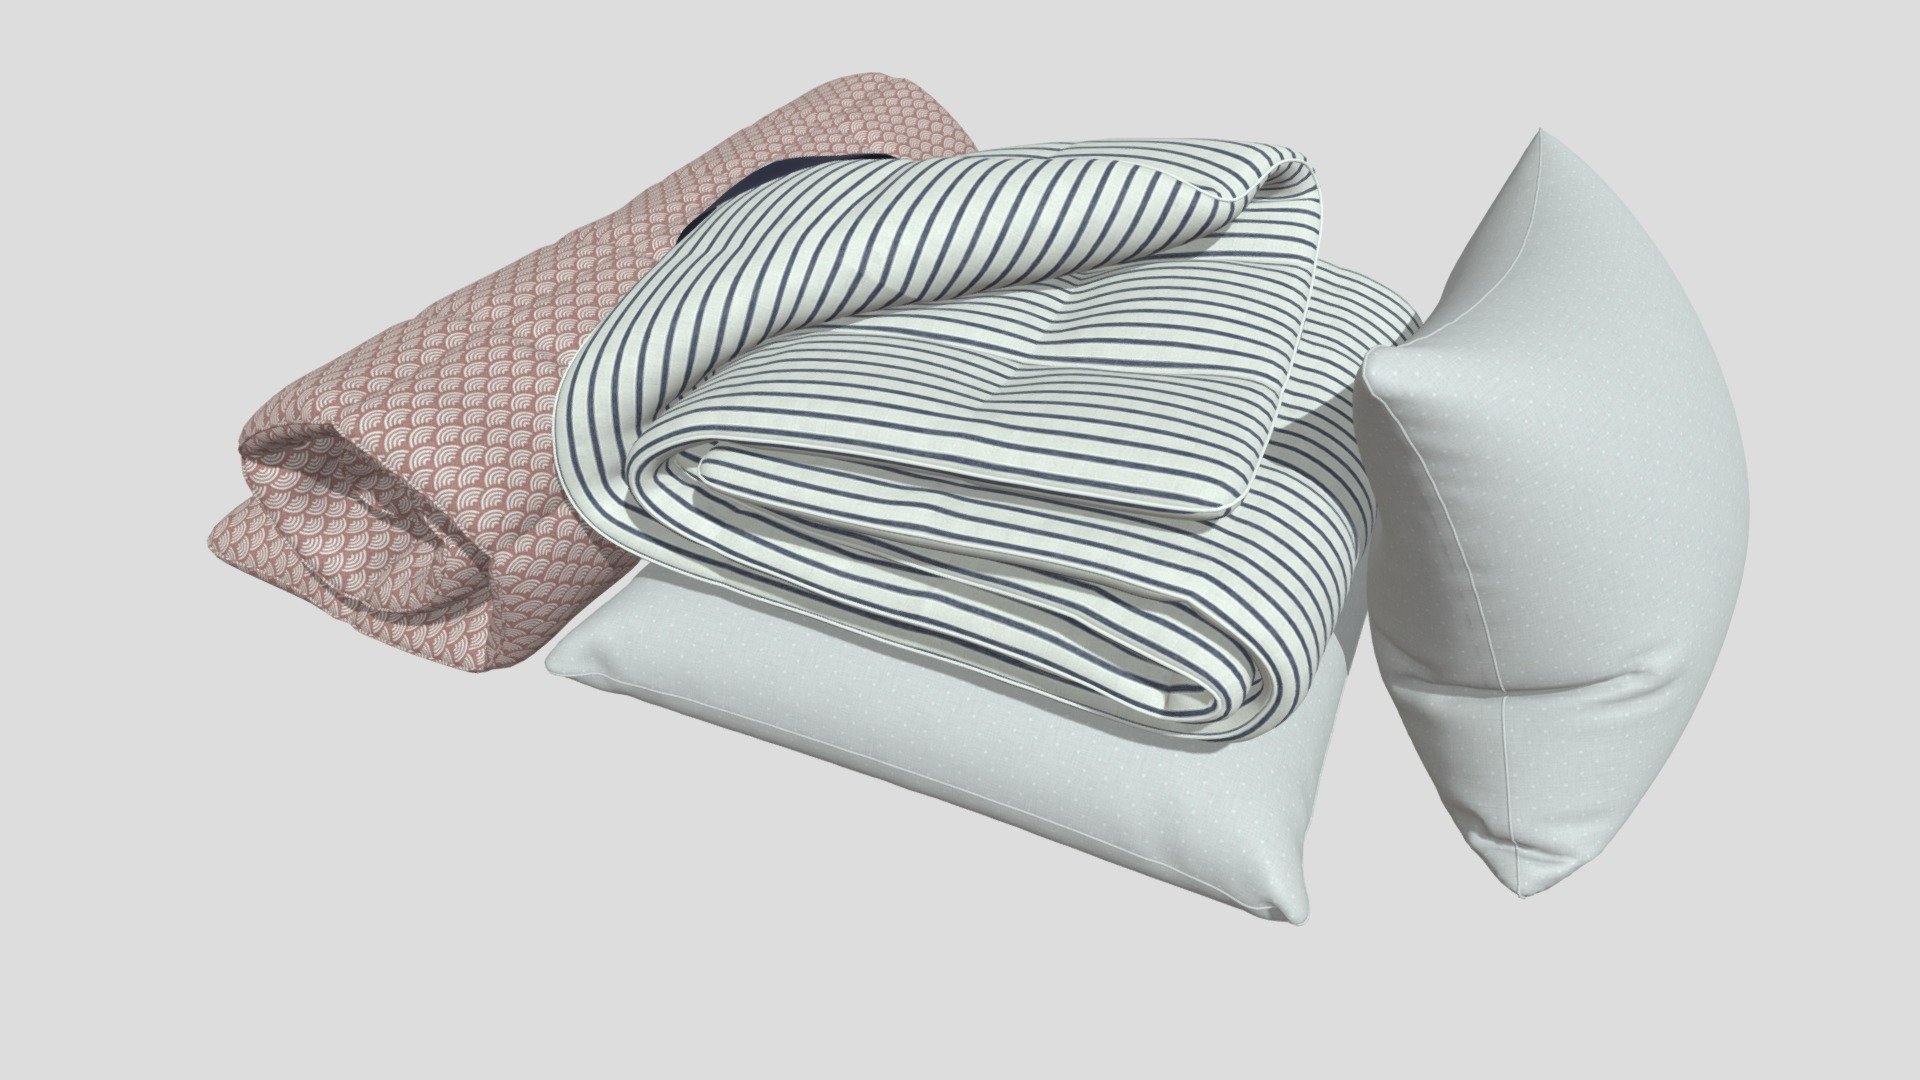 In the archive file 3ds max 2021 with maps, obf/fbx files, material library

Pillows and blanket created in Marvelous designer (UVW mapping and retopology done in 3Ds Max).
Dimensions: 1758mm x 1231mm x 516mm - Blanket and pillows - Download Free 3D model by niteris 3d model